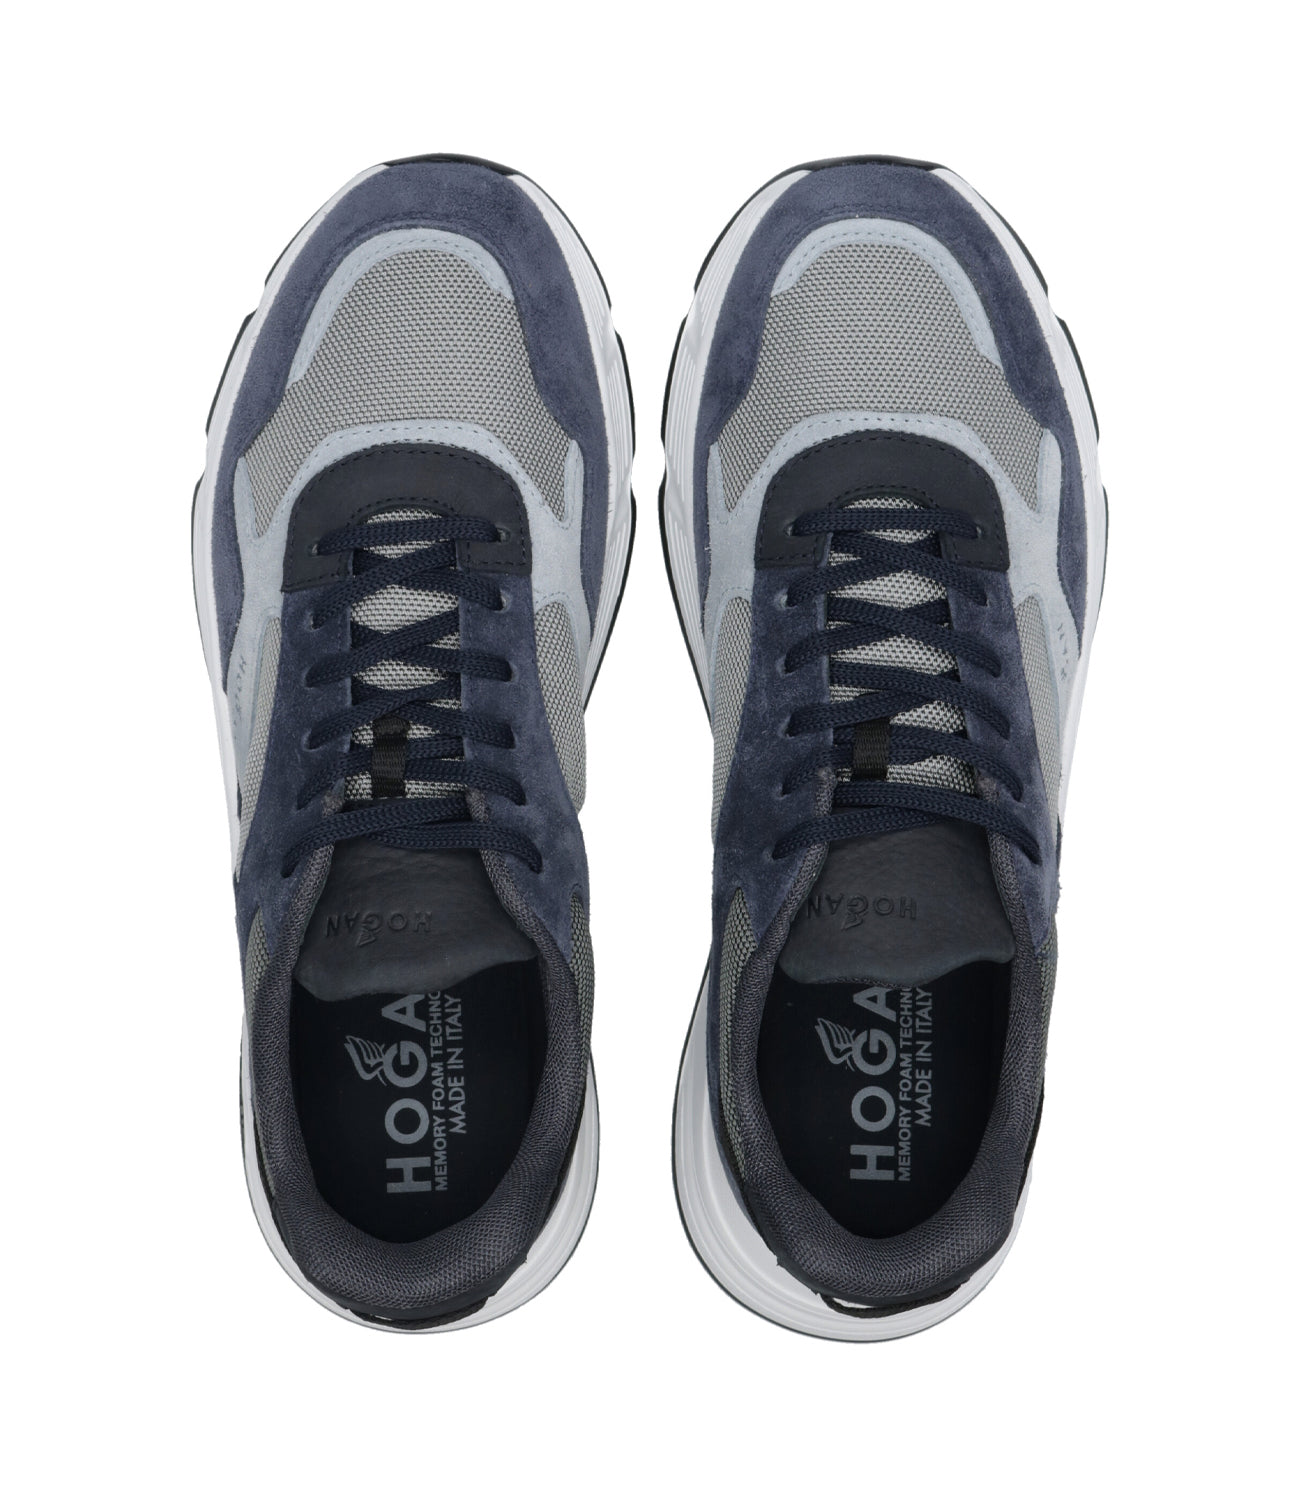 Hogan | Hyperlight Lace-up Sneakers Blue, Gray and Black